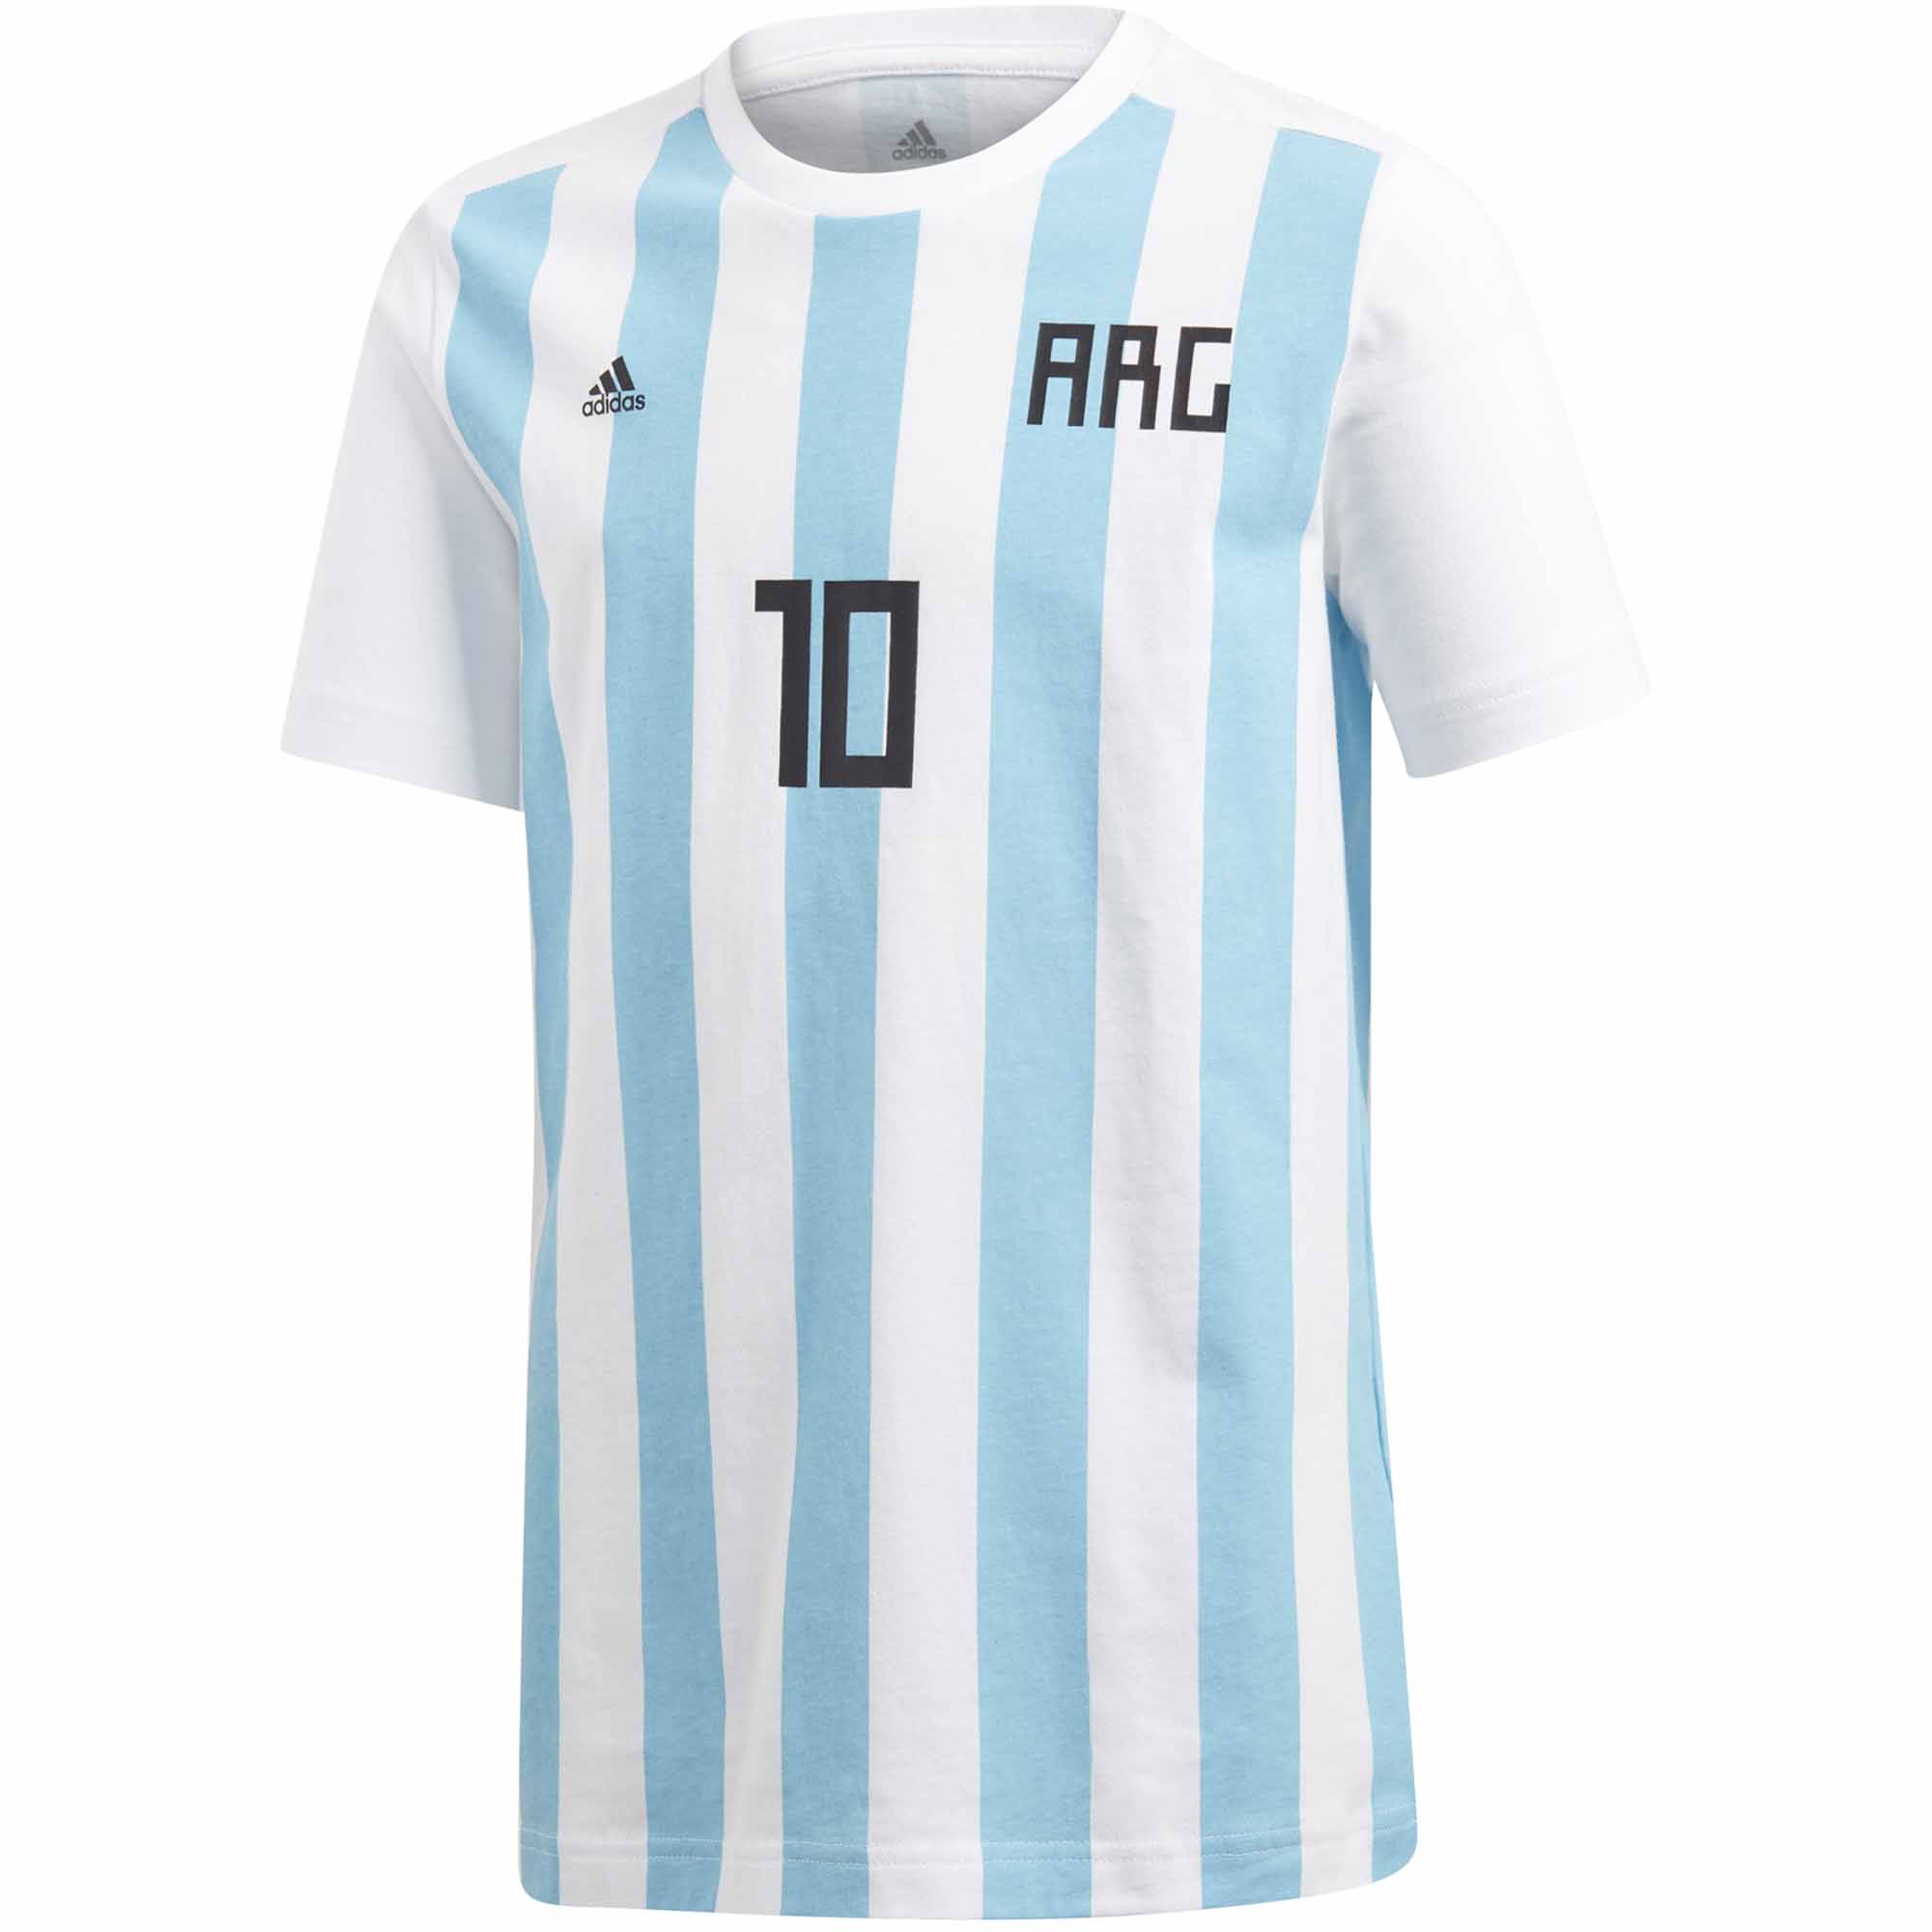 adidas messi jersey youth